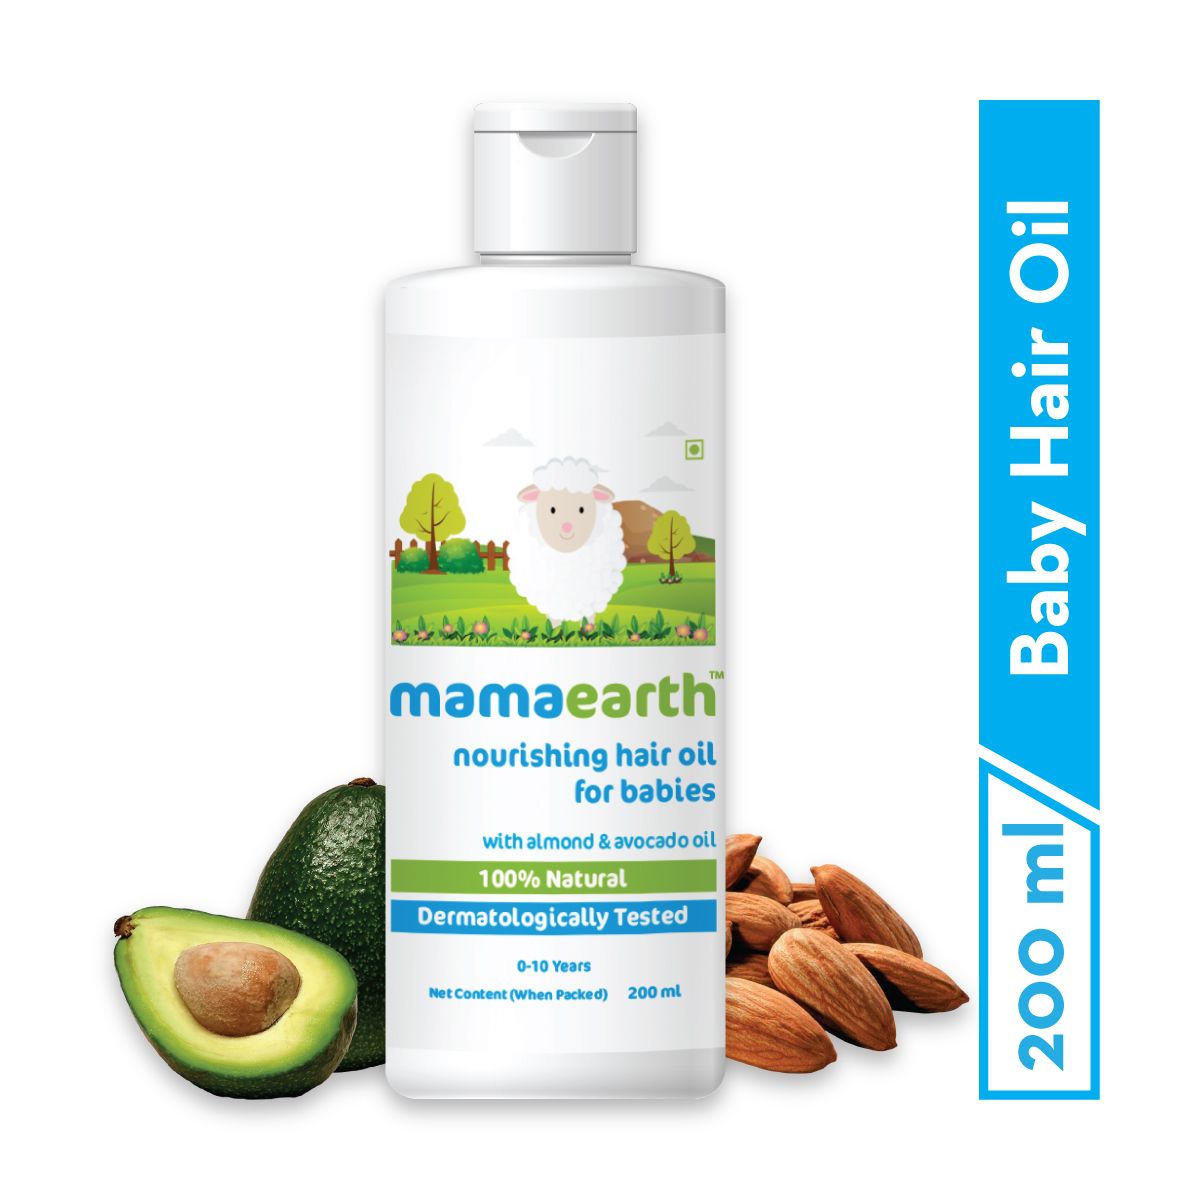 Mamaearth Nourishing Hair Oil Better Than Others Available In The Market